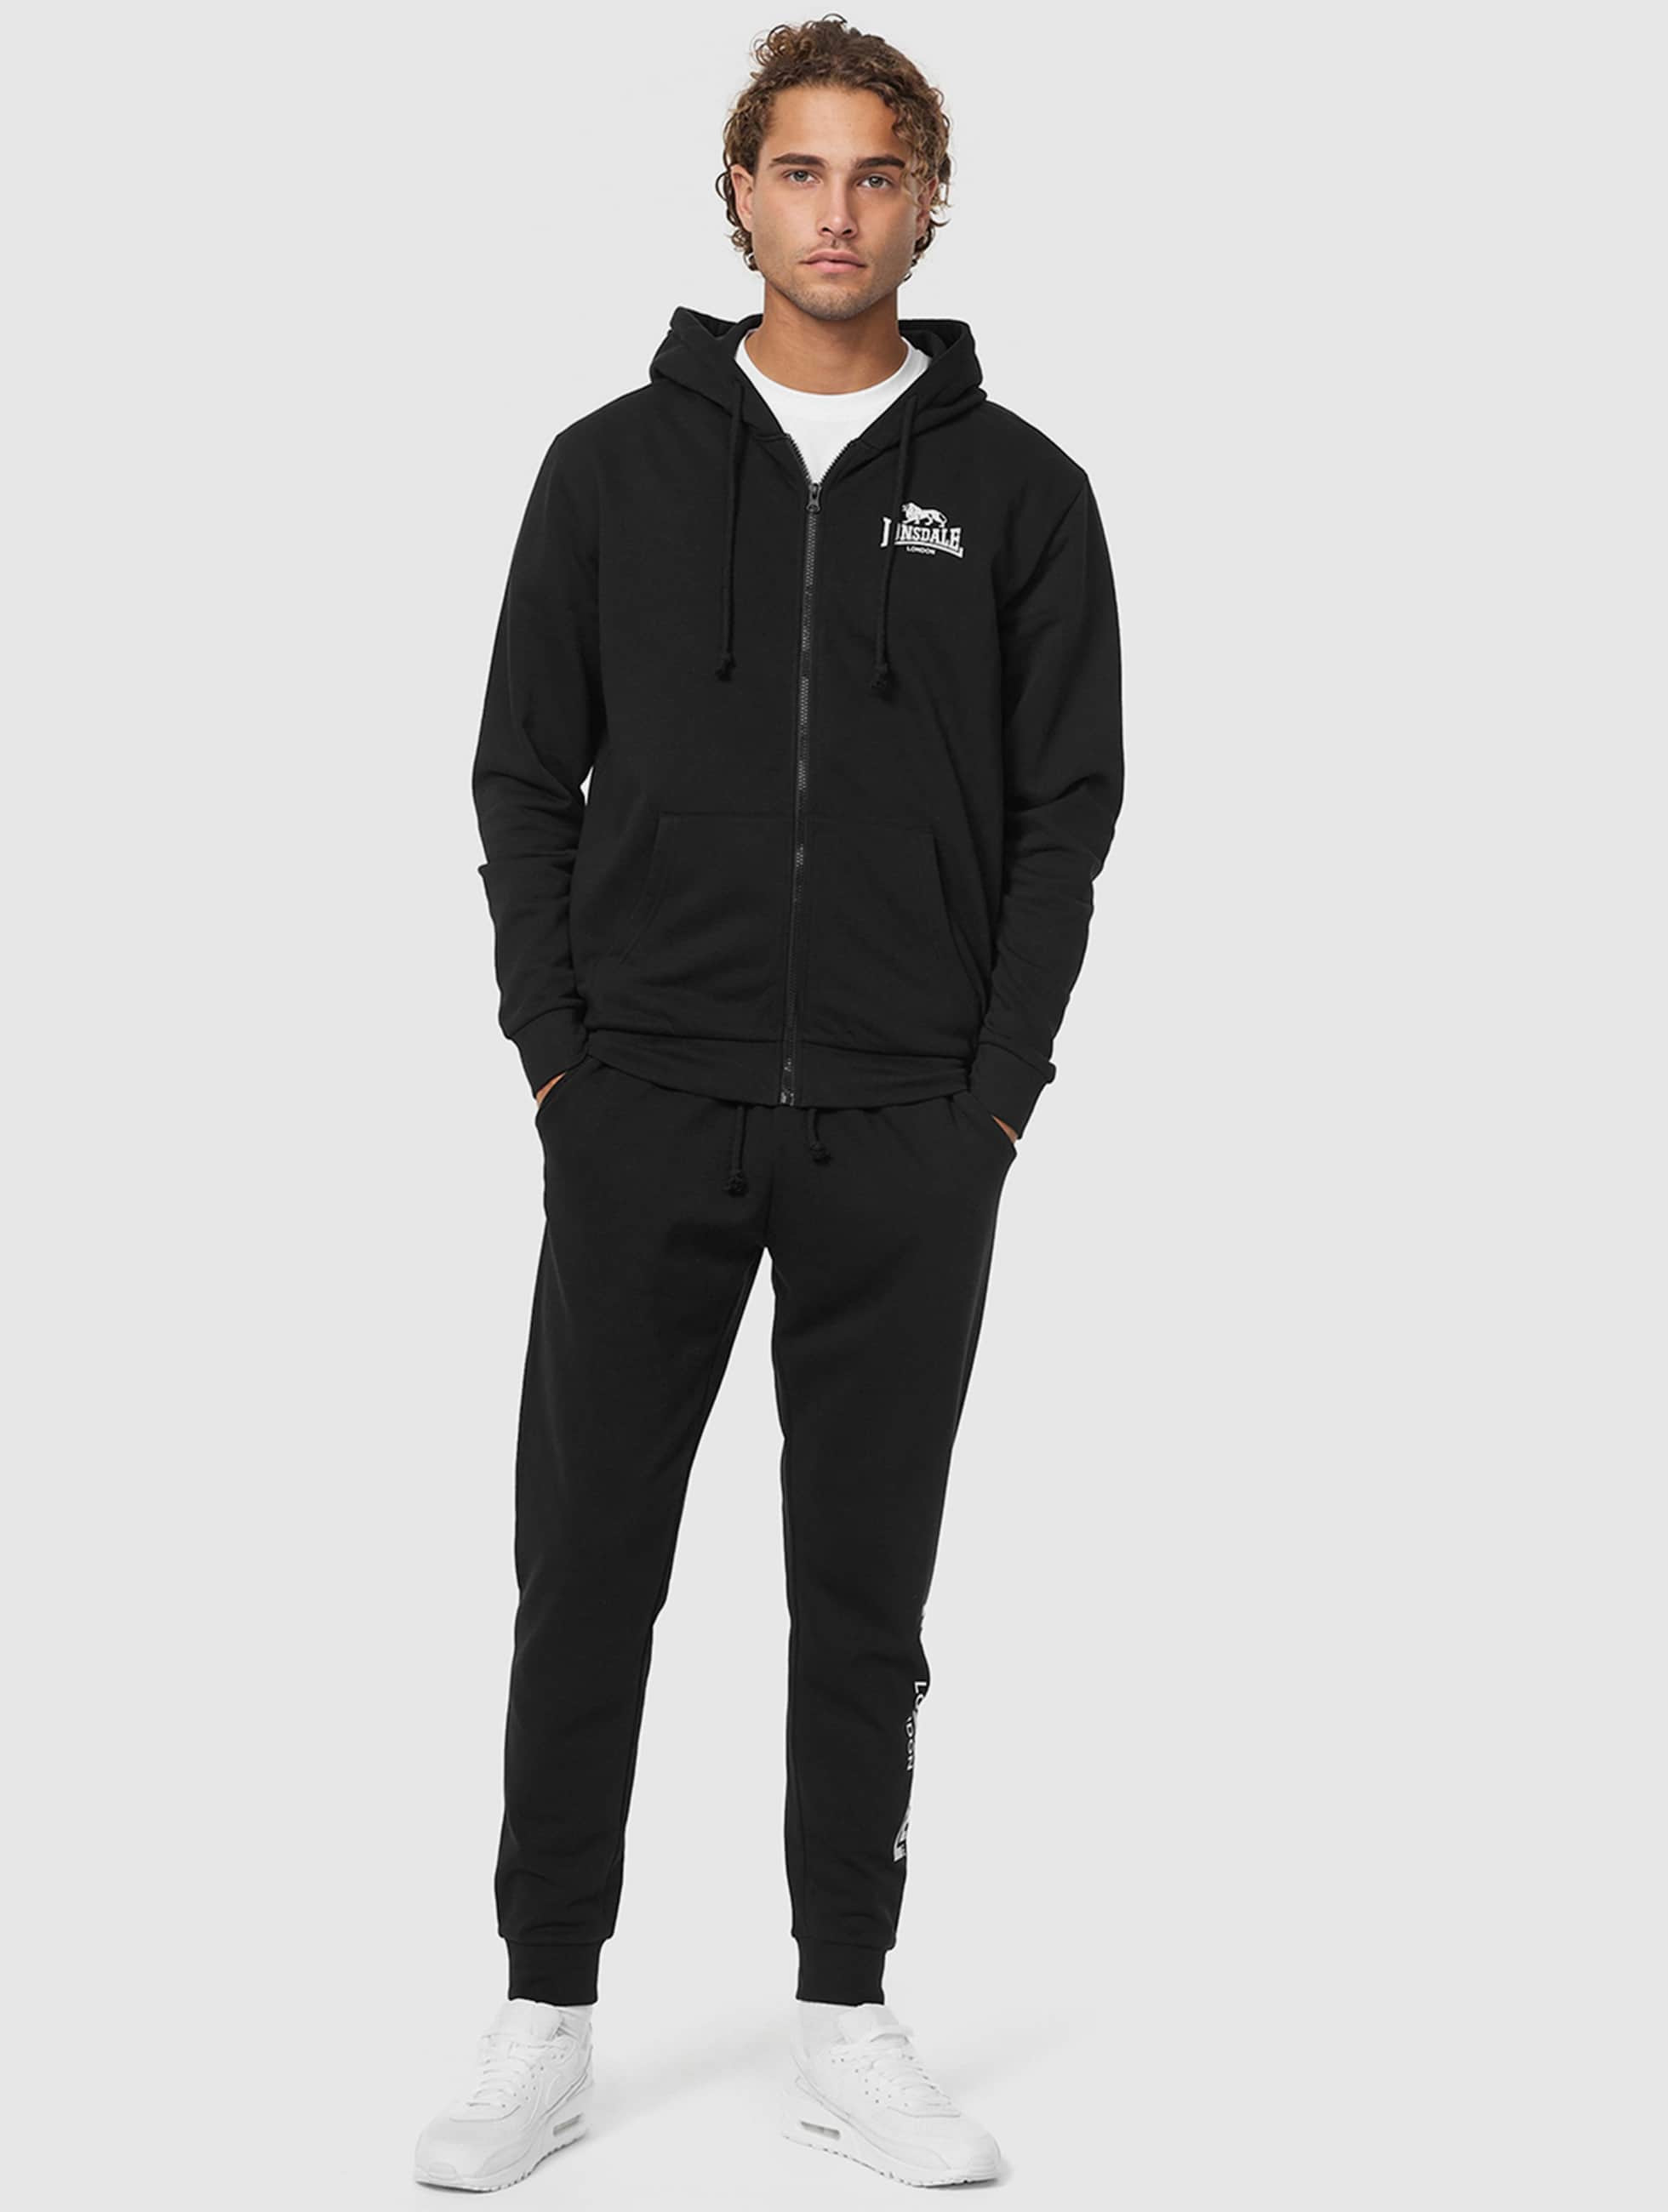 Lonsdale London / Suits Lhanbryde in black 999841